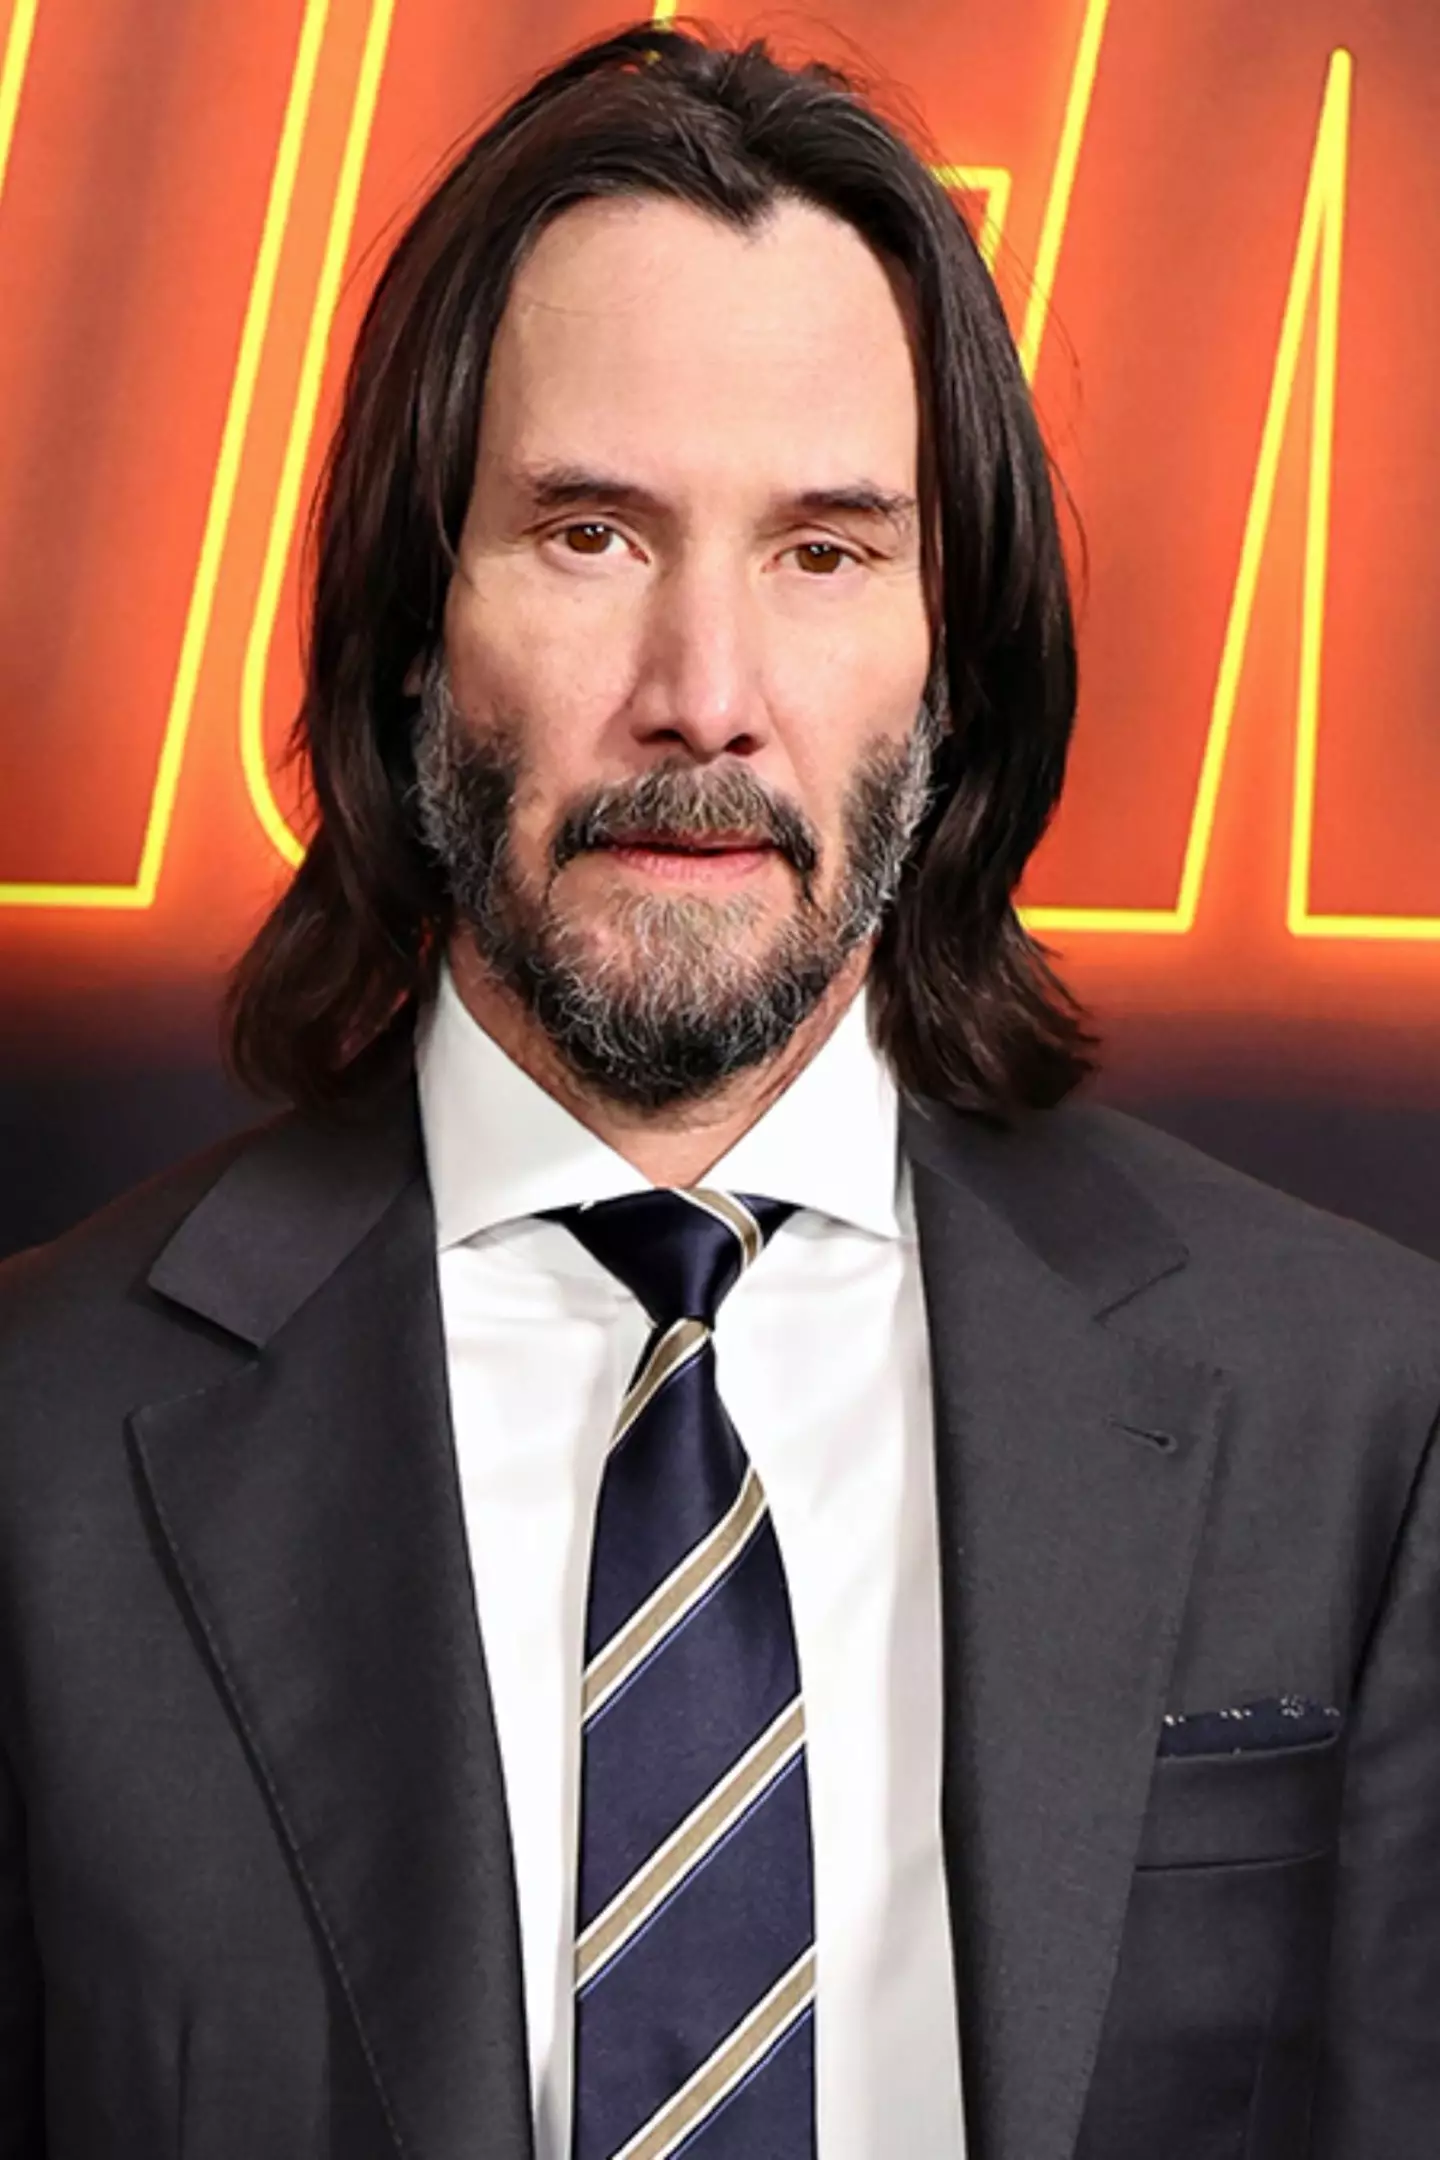 A scammer has been posing as Keanu Reeves. (Monica Schipper/Getty Images for Daily Front Row)